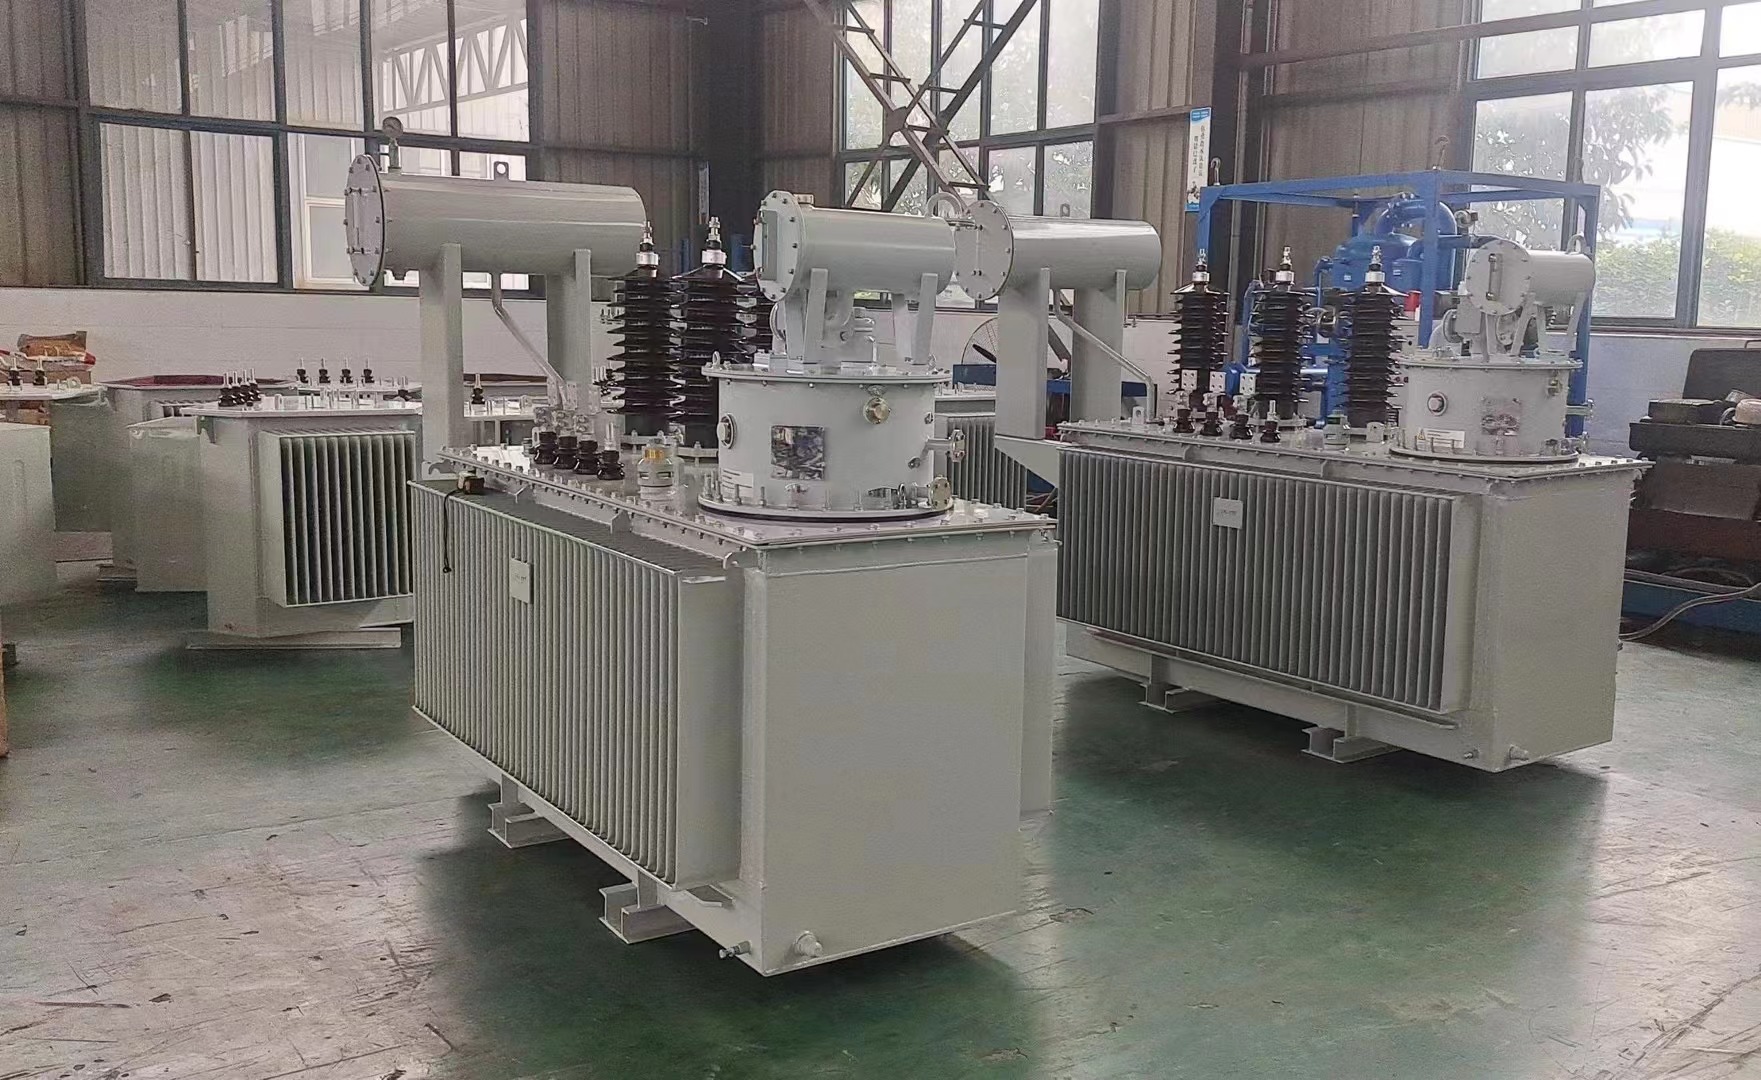 28 transformers ordered by the zambian customer have been finished and are ready to shipment   TSTY is a professional power transformer manufacturer in china with 20 years, Maufacturer of electrical transformer- dry type electrical transformer,electrical power transformer,high coltage tranformer and industrial transformer offered switchgear and compact transformer.Our factory to sale transformer directly, Get Live Quates Now!